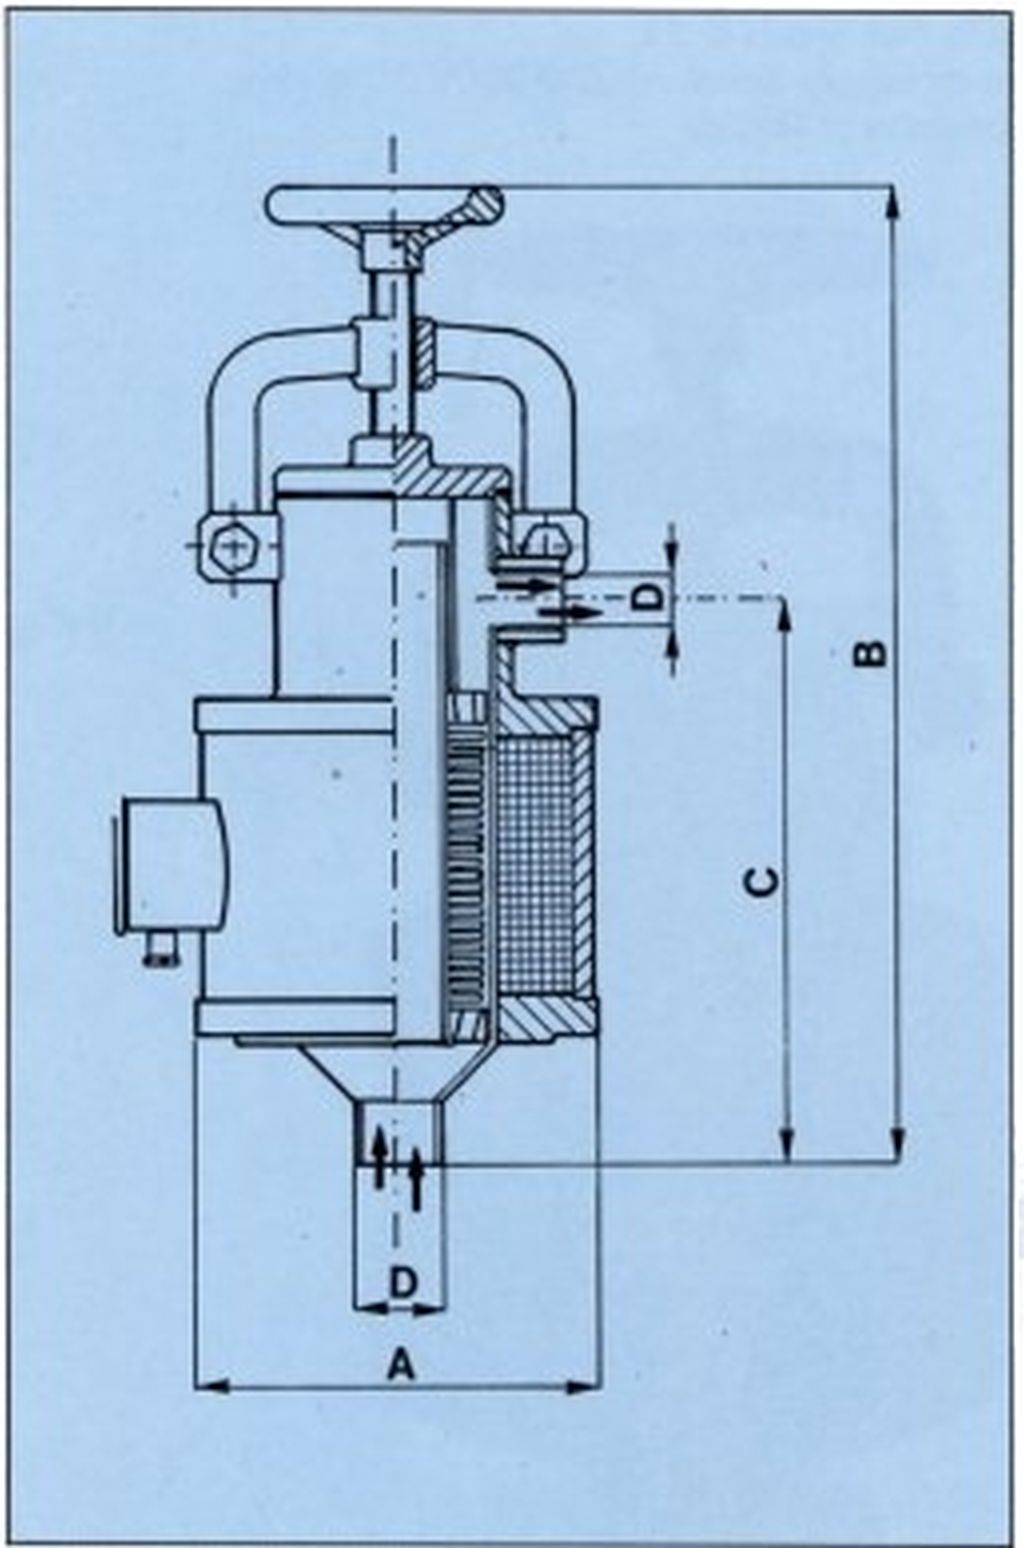 FPL Electro magnetic pressure filter for enamels dimesnion drawing